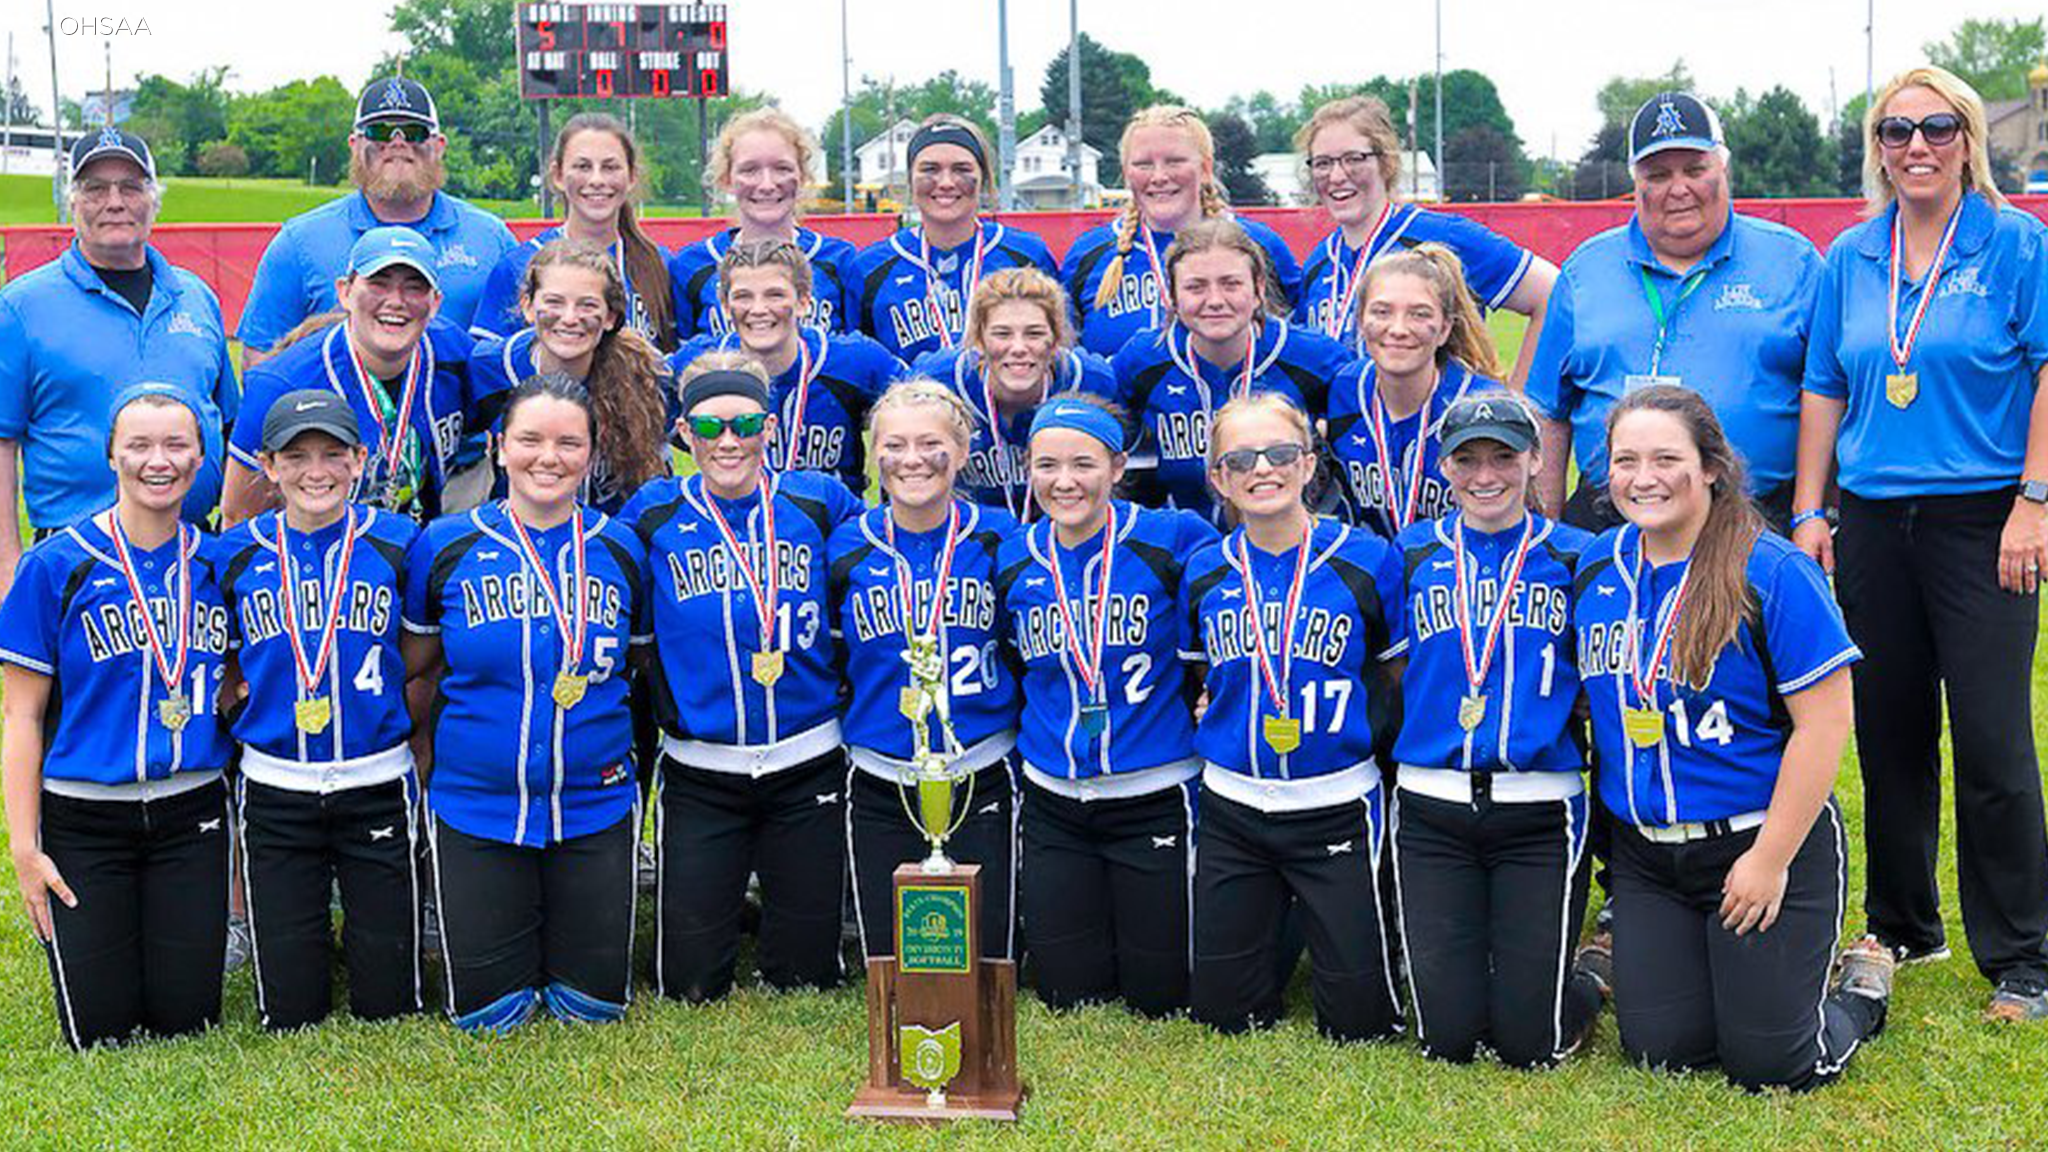 Antwerp softball state title becomes one of celebration for whole community